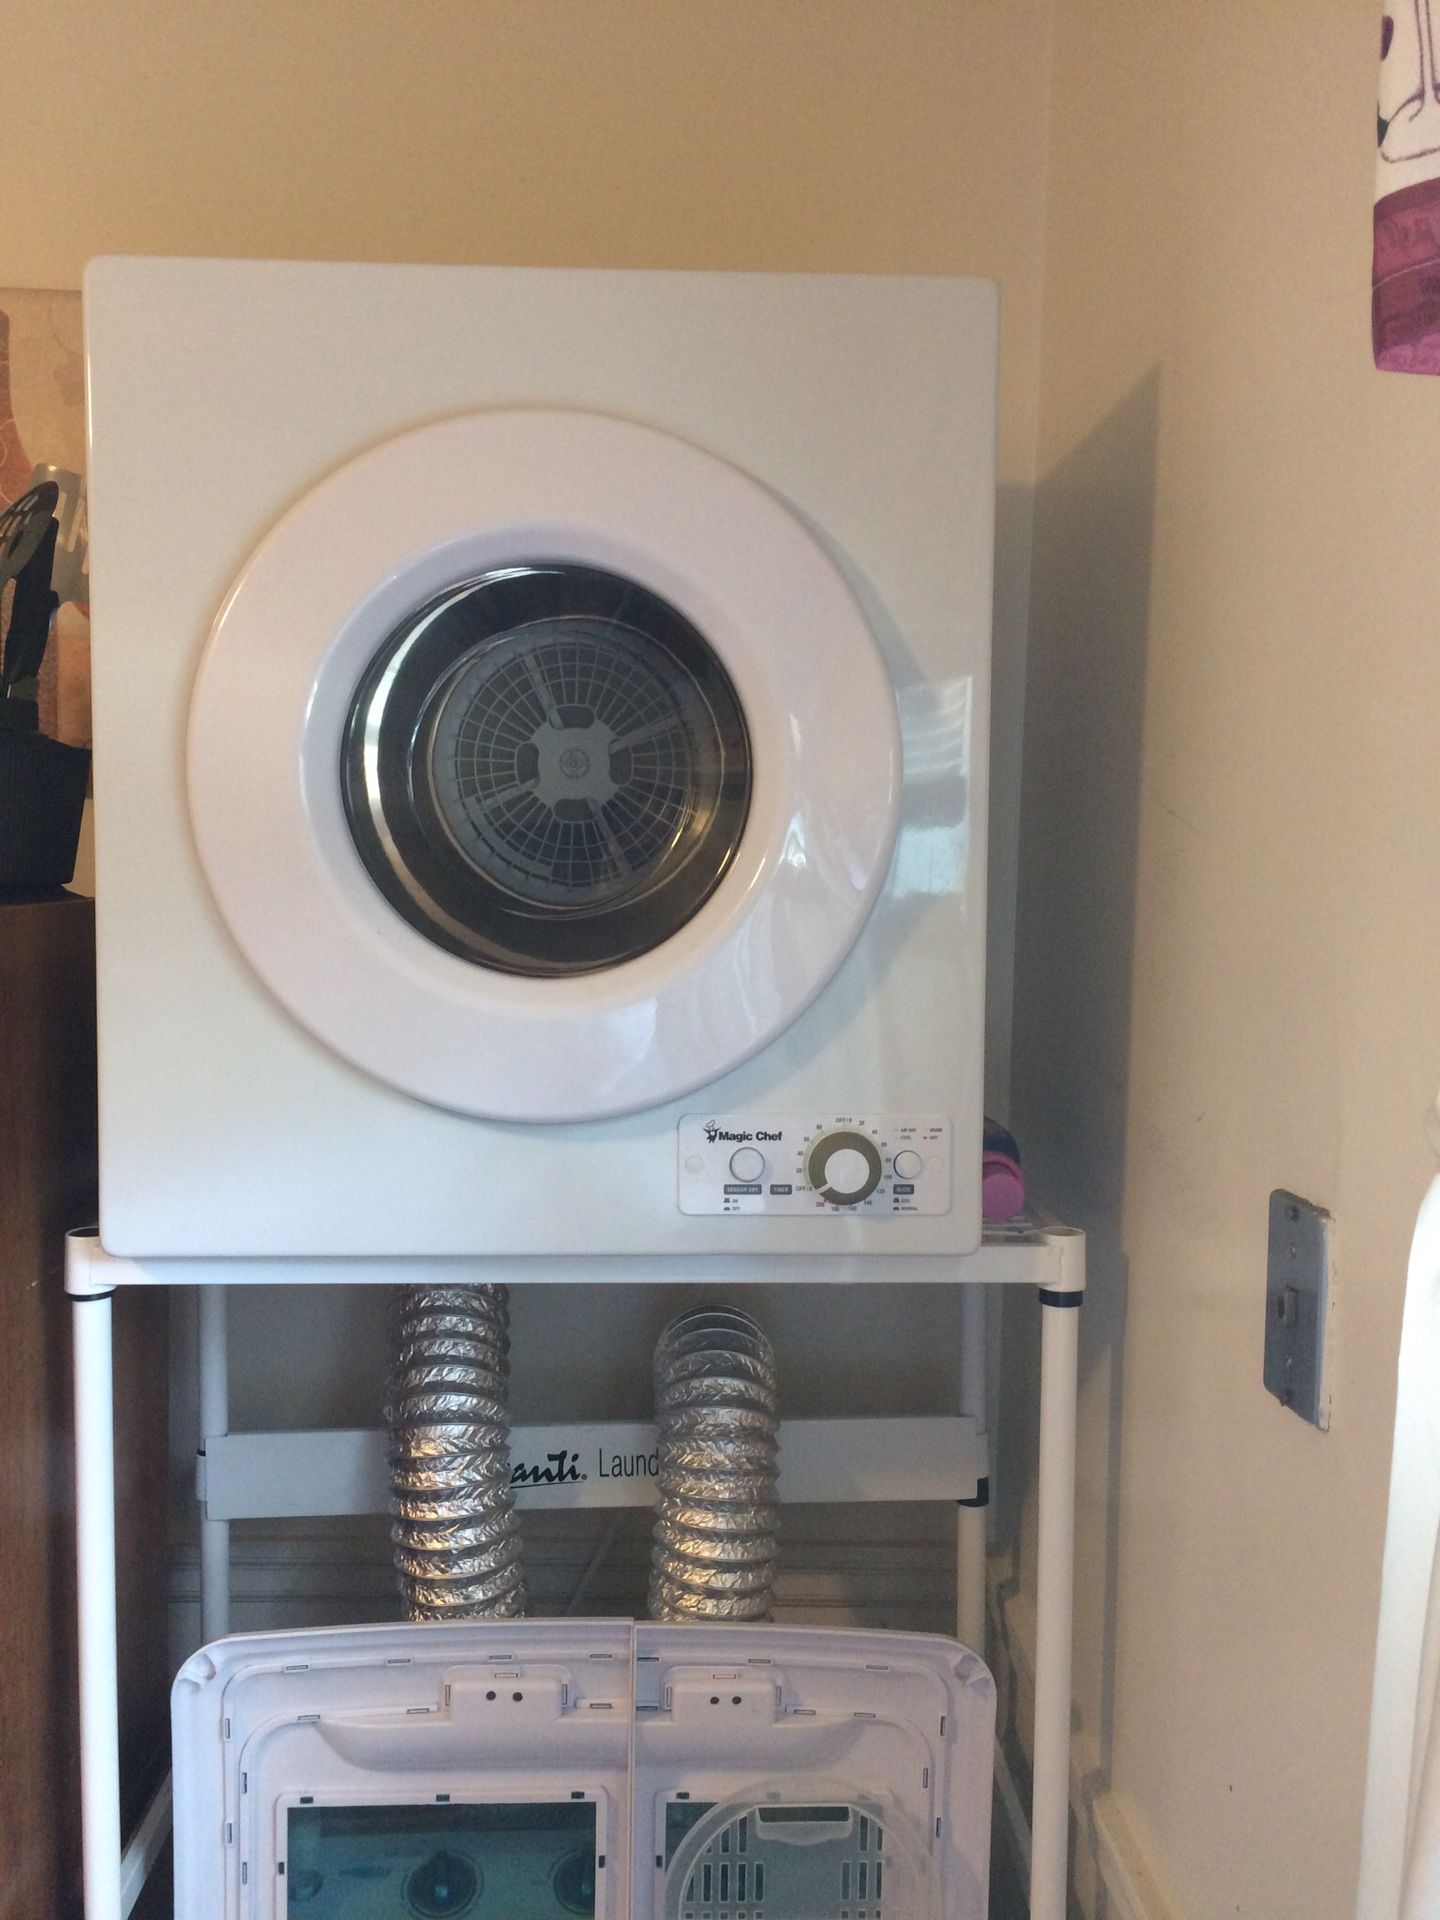 MAGIC CHEF MCSDRY35W Compact 3.5 cu. ft. Dryer for Sale in Webster, TX -  OfferUp